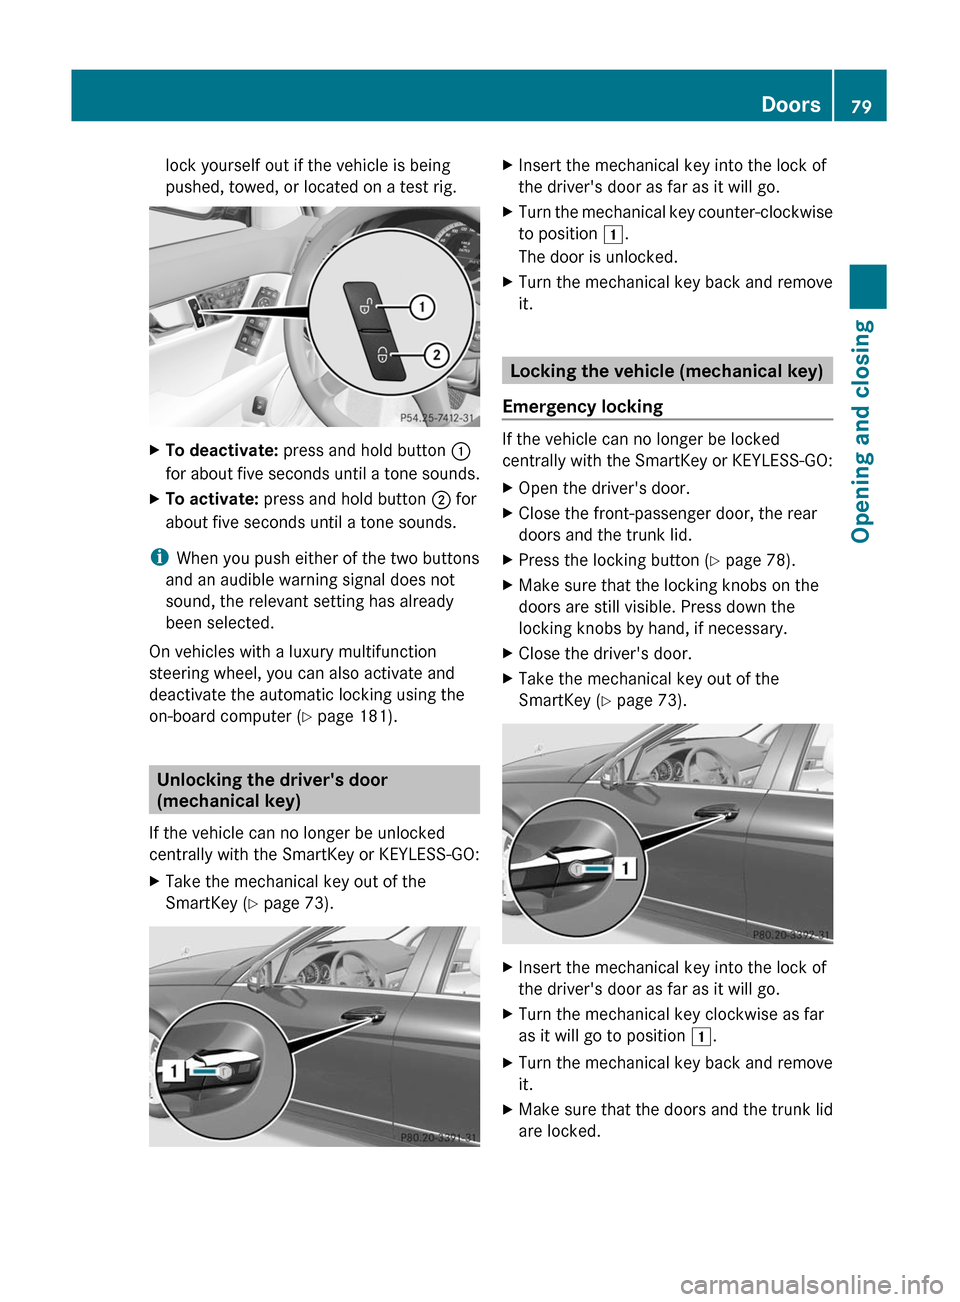 MERCEDES-BENZ C-Class 2011 W204 User Guide lock yourself out if the vehicle is being
pushed, towed, or located on a test rig.
XTo deactivate: press and hold button :
for about five seconds until a tone sounds.
XTo activate: press and hold butt